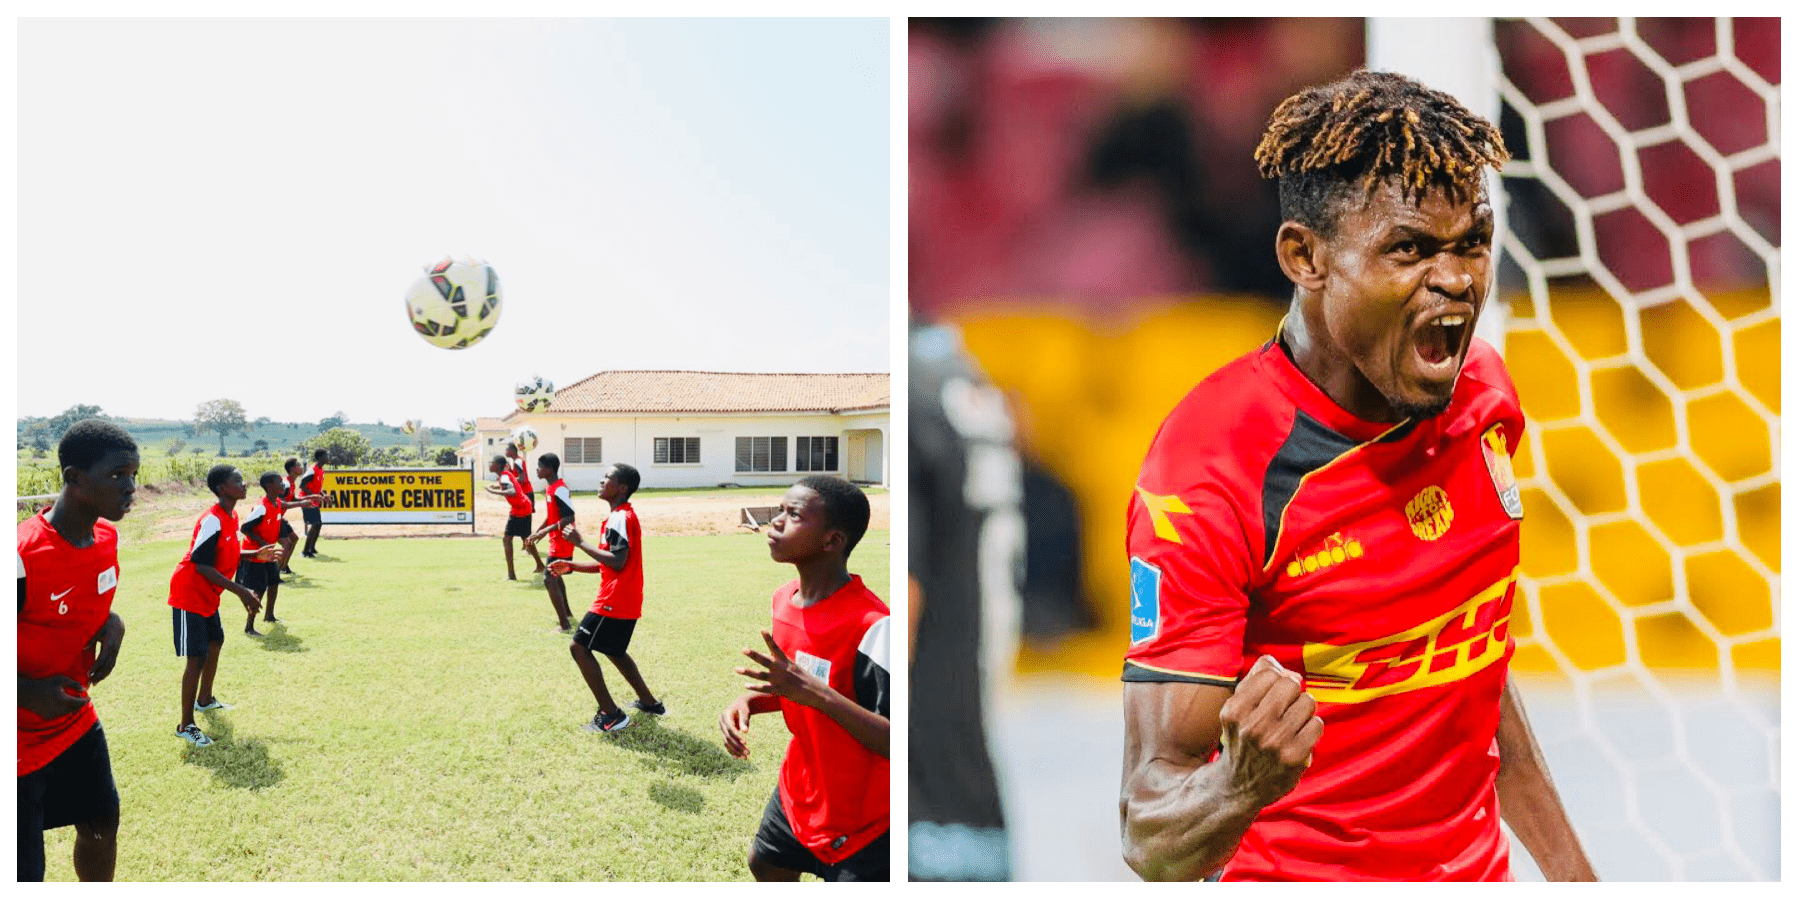 Processes you should go through to become a successful footballer in Ghana